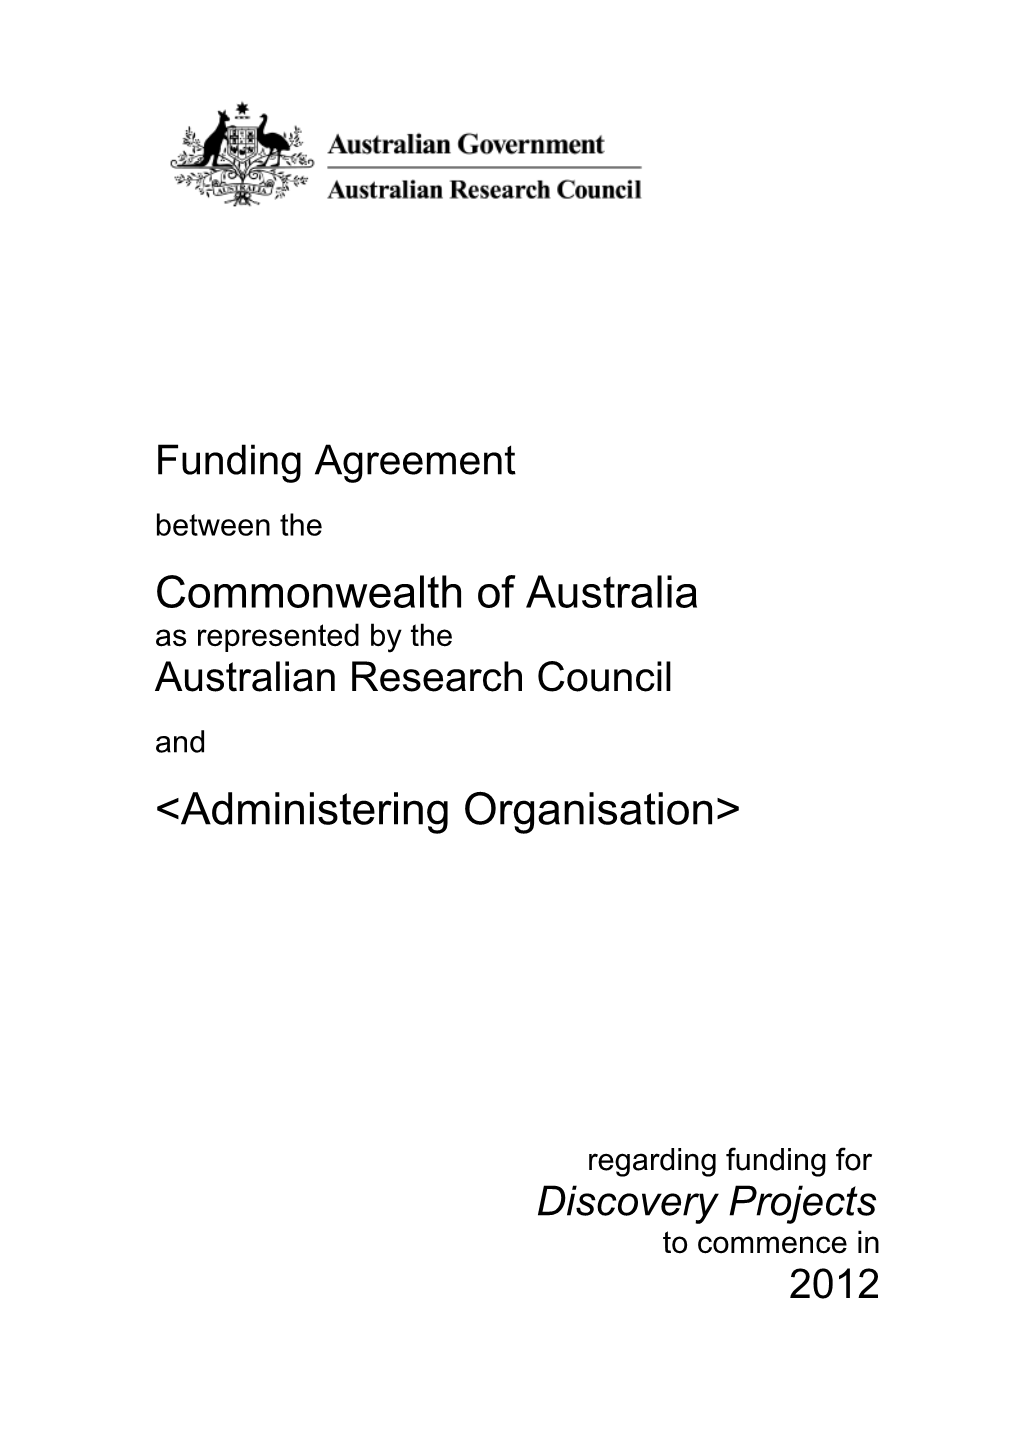 Discovery Projects Funding Agreement for Funding Commencing in 2012